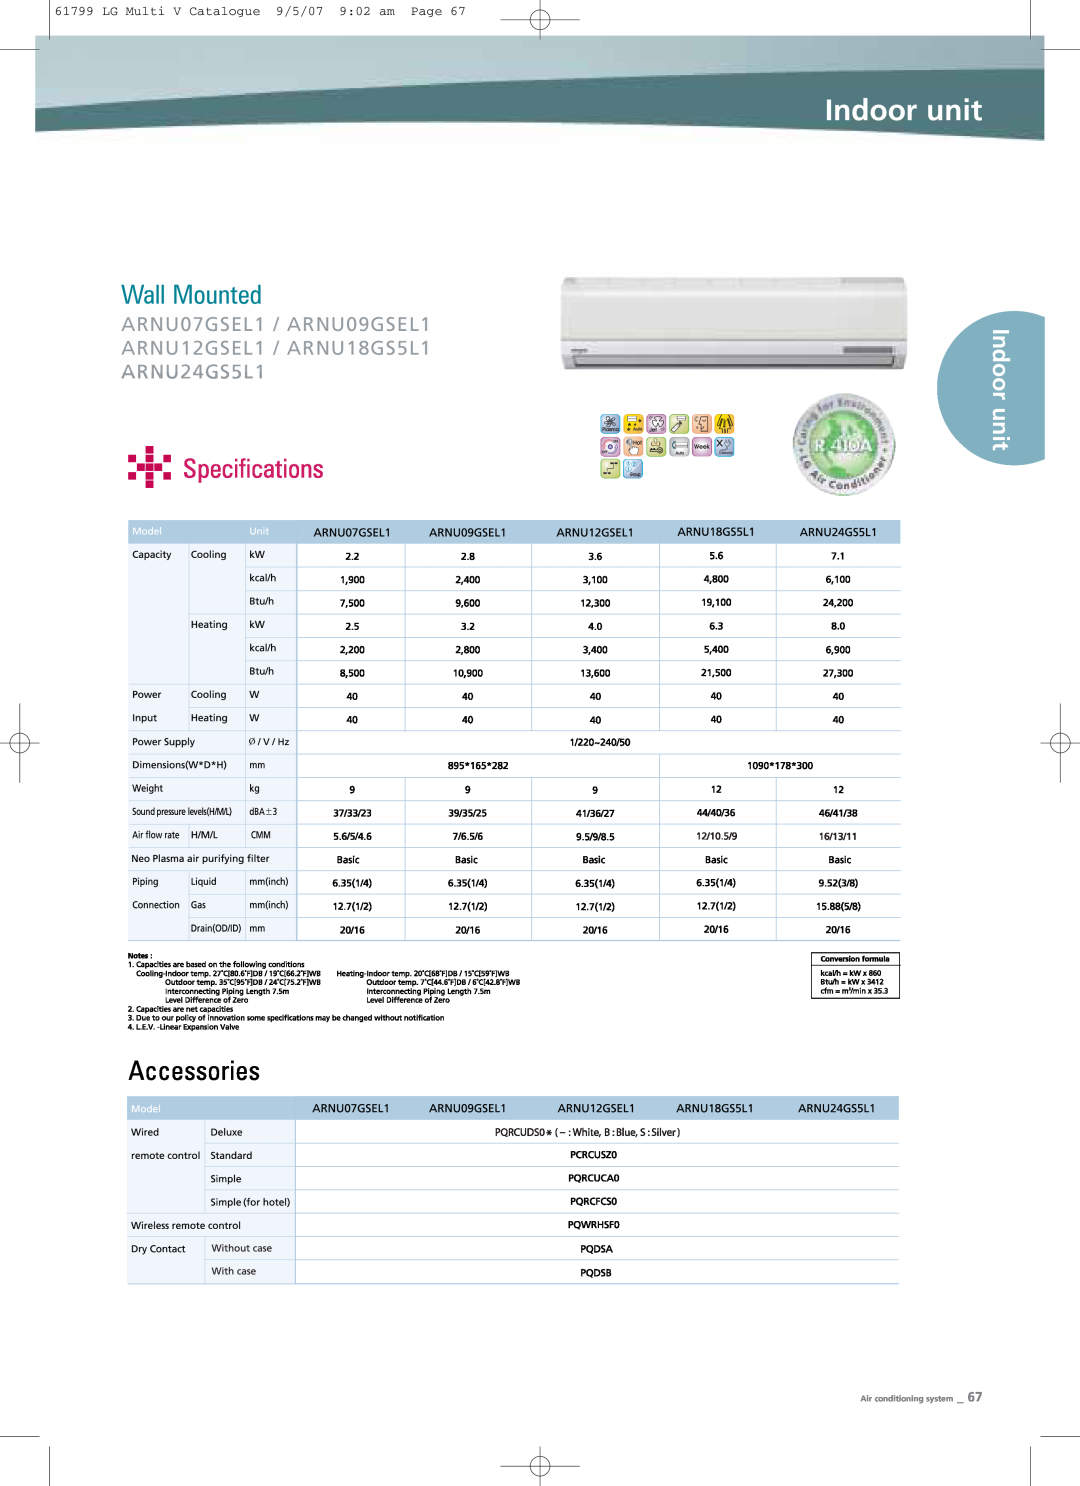 LG Electronics PRHR040 manual Wall Mounted, unit Specifications, Indoor unit, LG Multi V Catalogue 9/5/07 902 am Page 